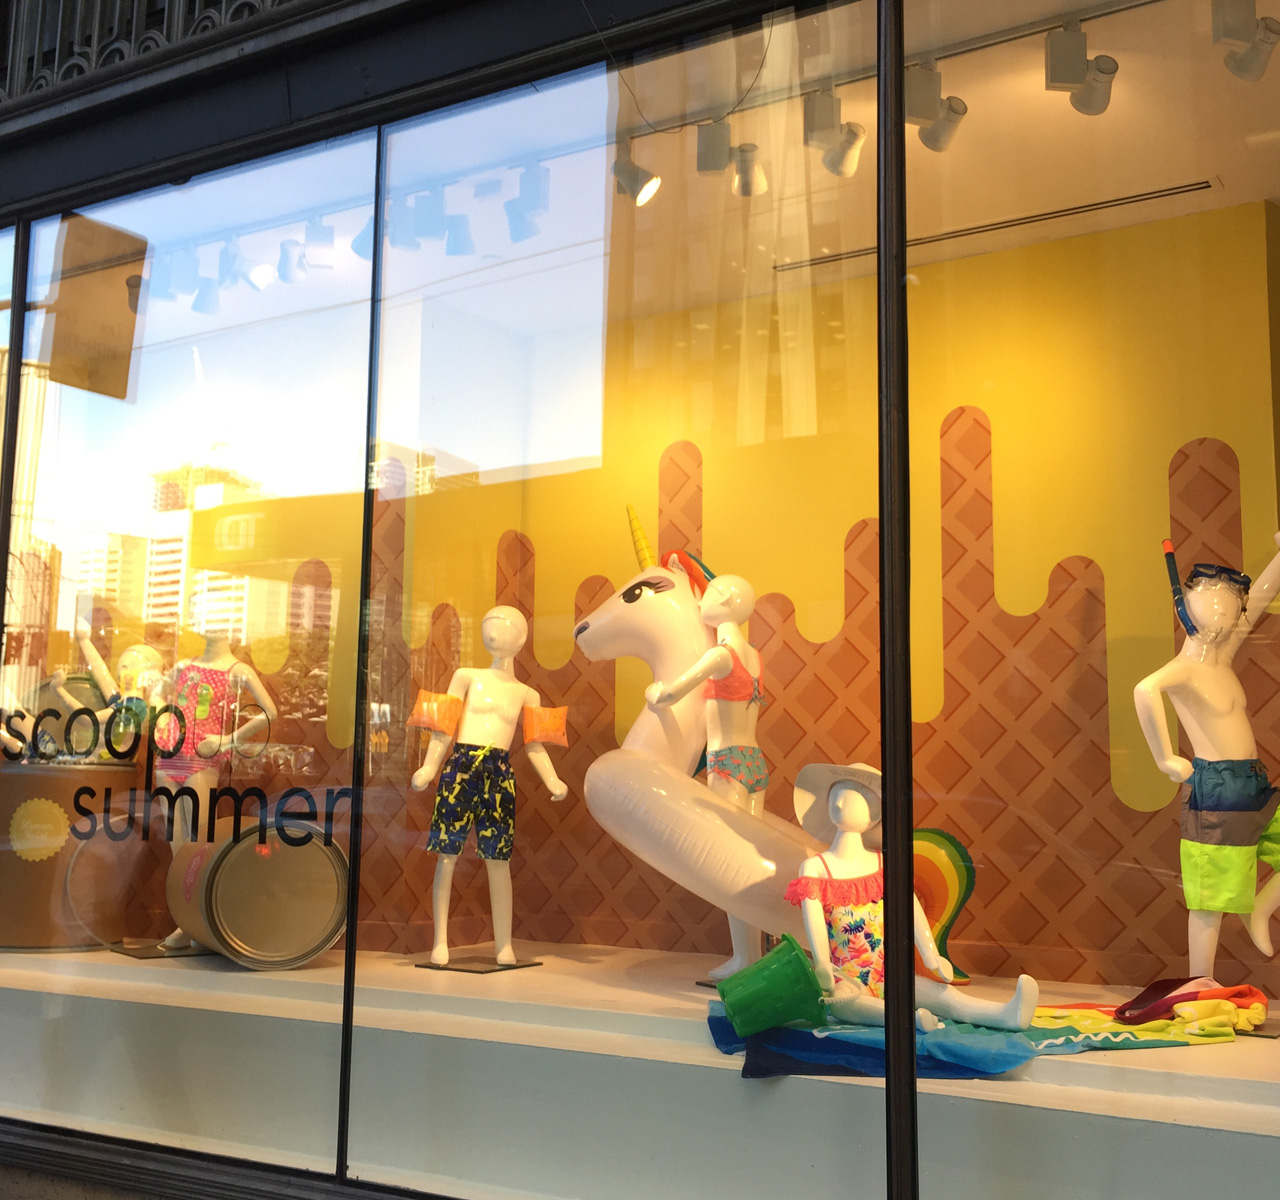 Visual Merchandising Retail Window Displays for HBC - Central Station